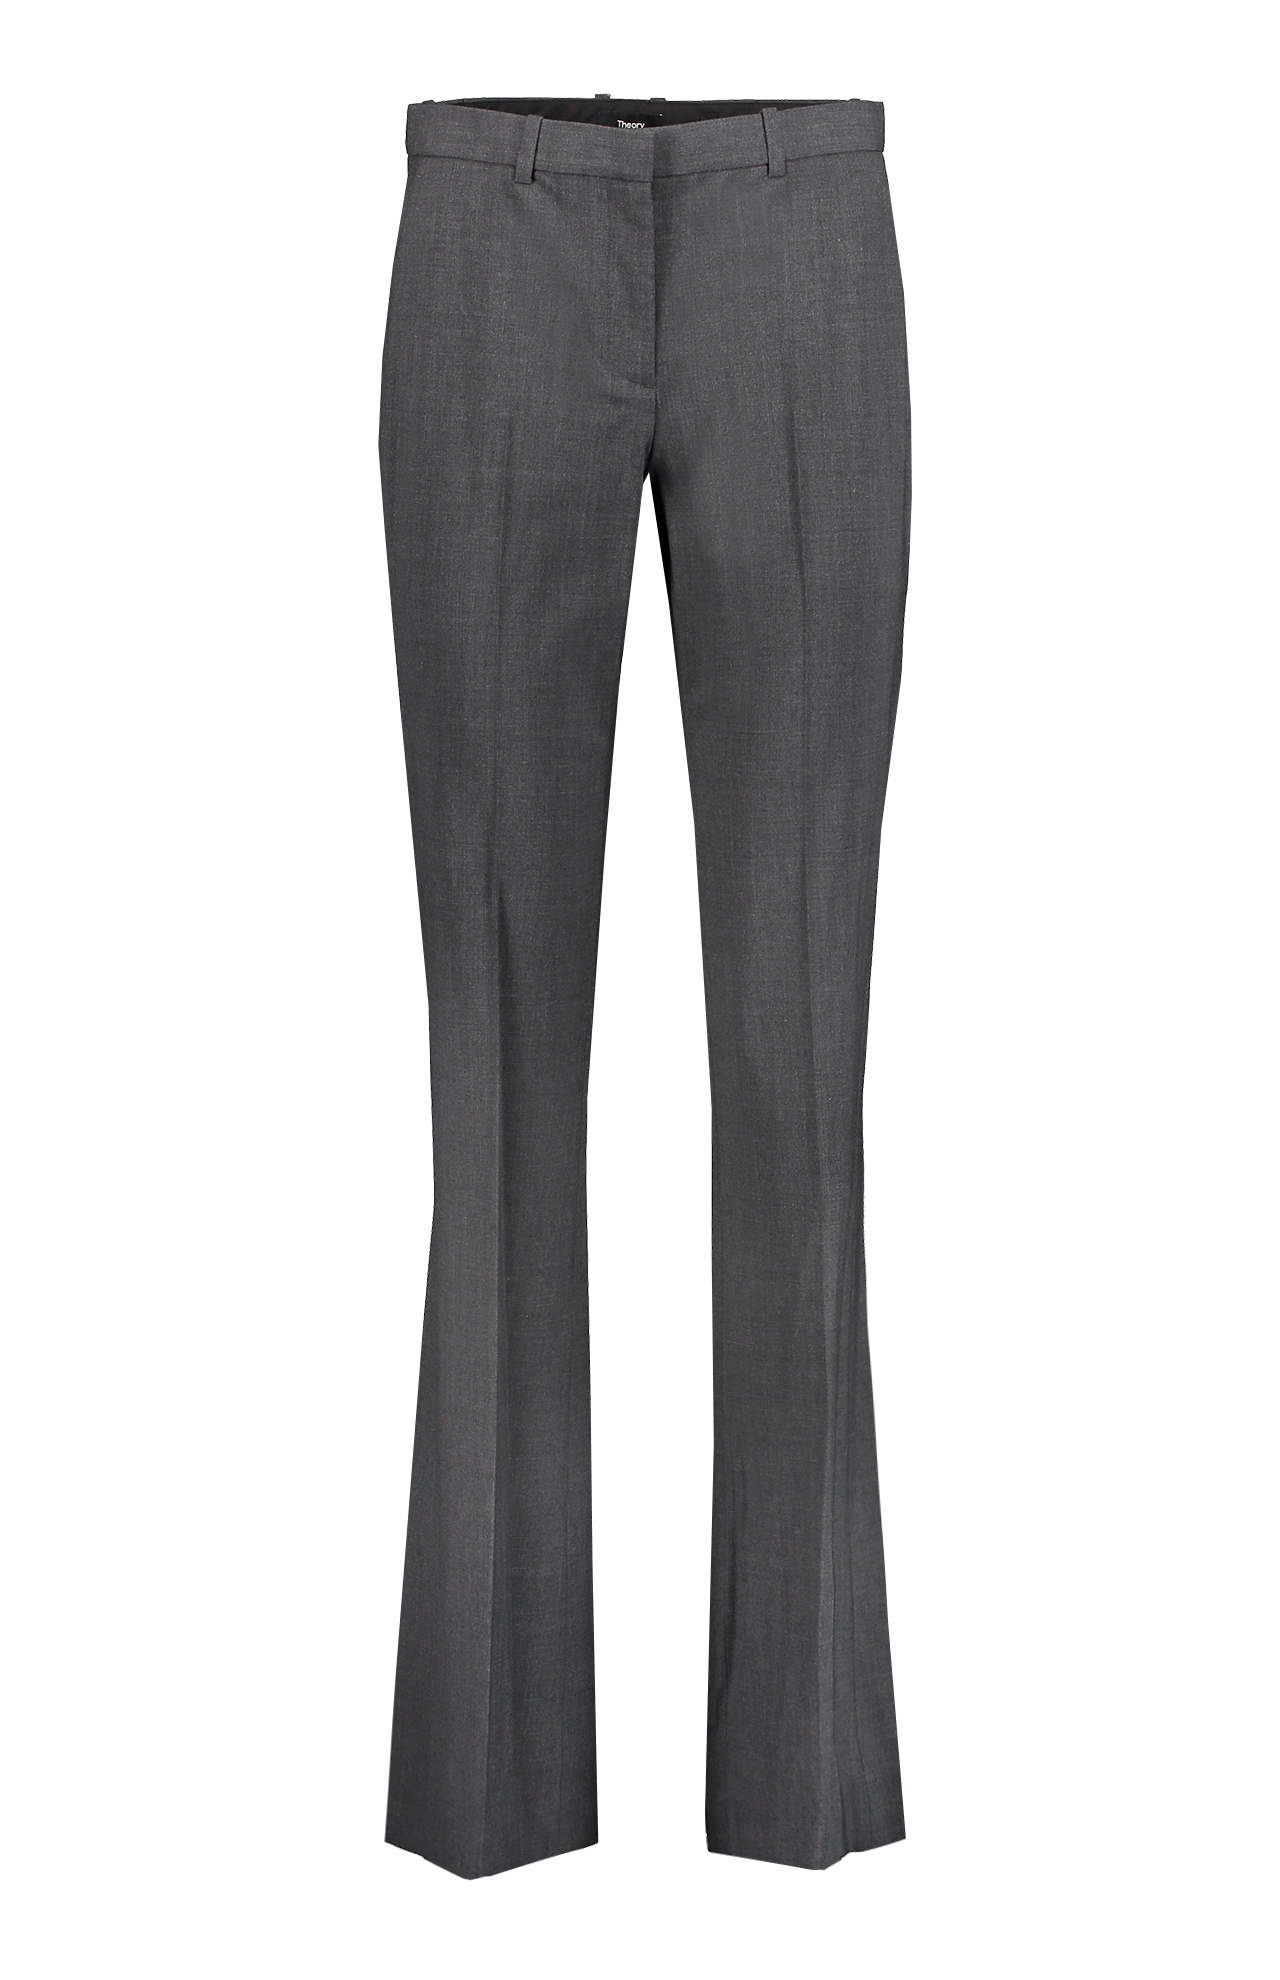 Theory Demitria Pant Charcoal Melange Front Mannequin Image (6947931029619)